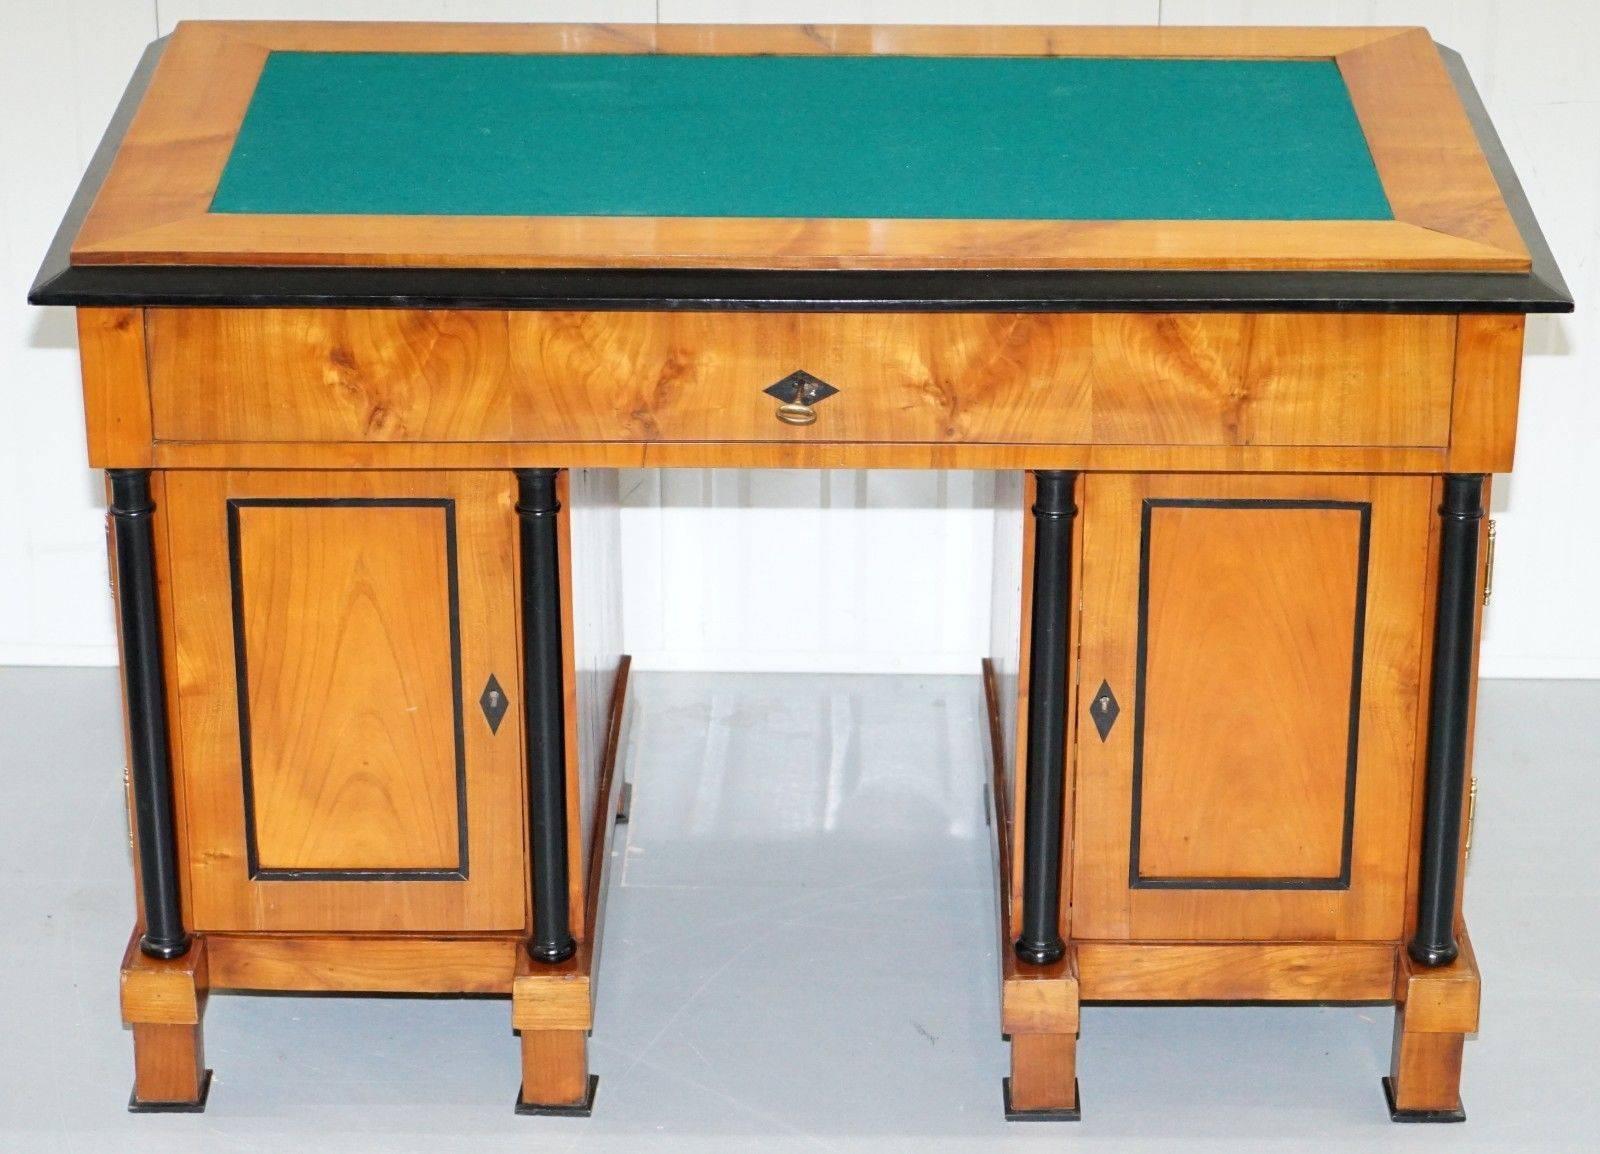 Wimbledon-Furniture is delighted to offer for sale this stunning, circa 1840-1860 Biedermeier satin birch twin pedestal partner

A very rare and good looking piece, rare to find as a solid twin pedestal like this, the condition is good for the